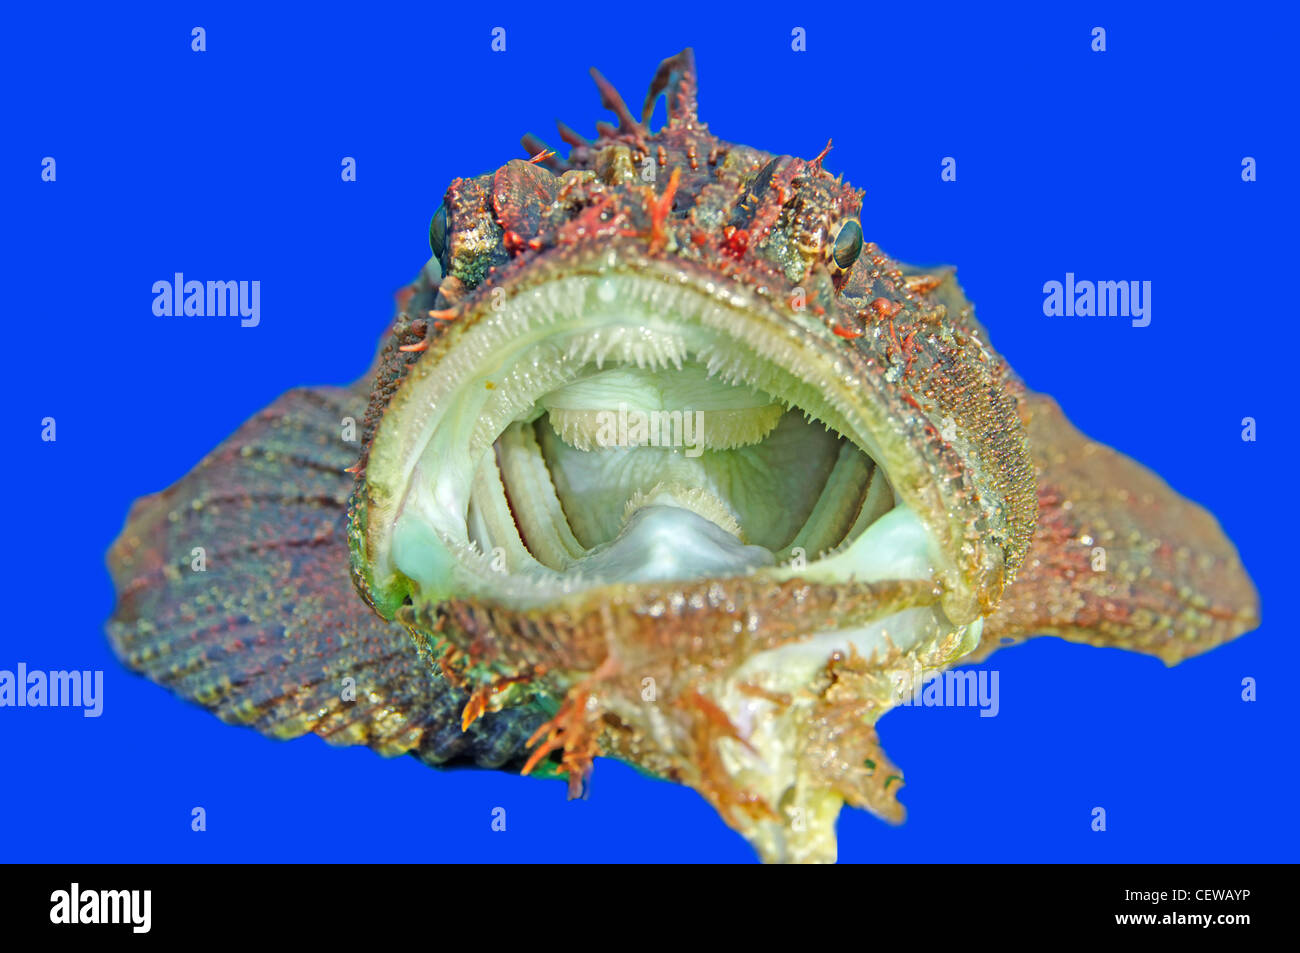 gobius fish on a blue background with a large open mouth Stock Photo